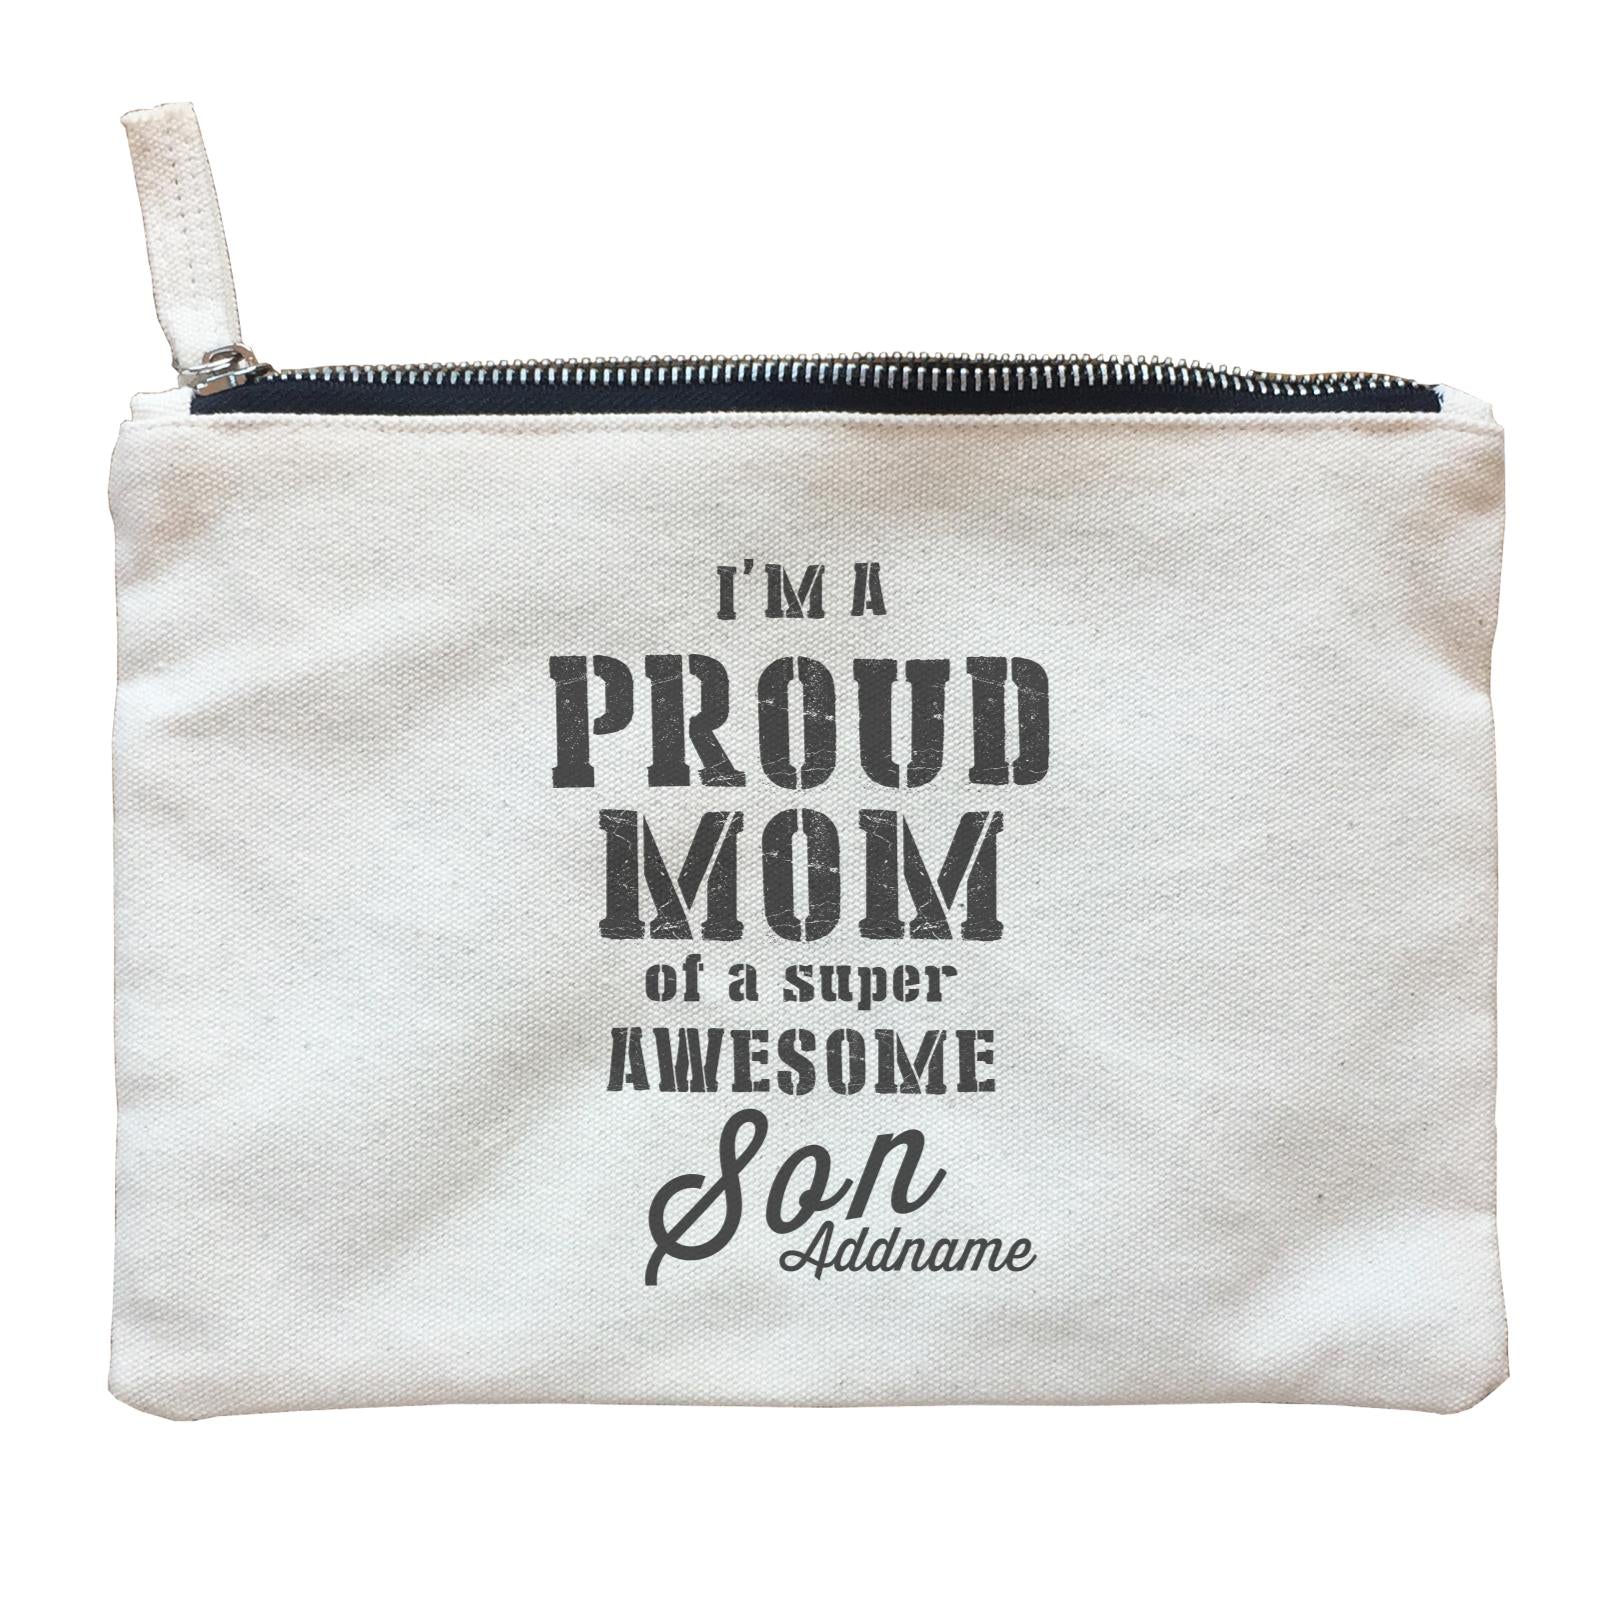 Proud Family Im A Proud Mom Of A Super Awesome Son Addname Zipper Pouch